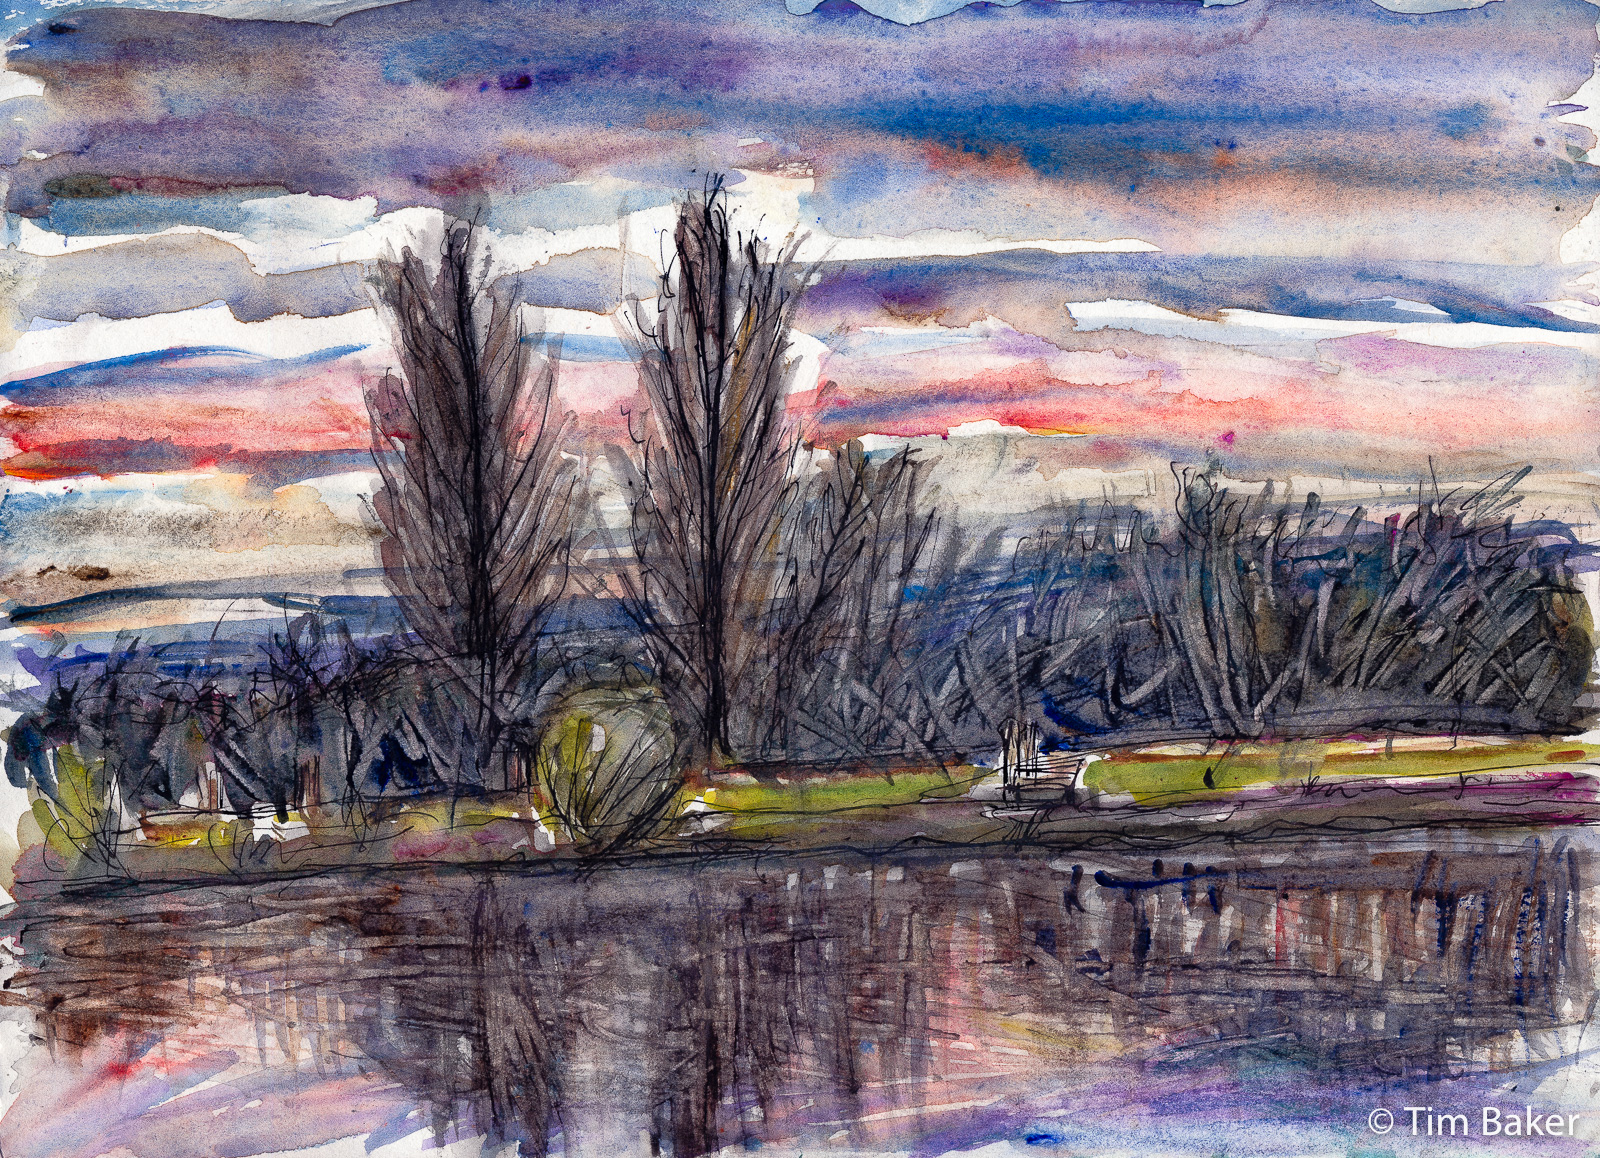 Sunset Cypresses,Queen's Promenade, Watercolour, Fountain Pen and sgraffito, A4 Artway Flat White Sketchbook.